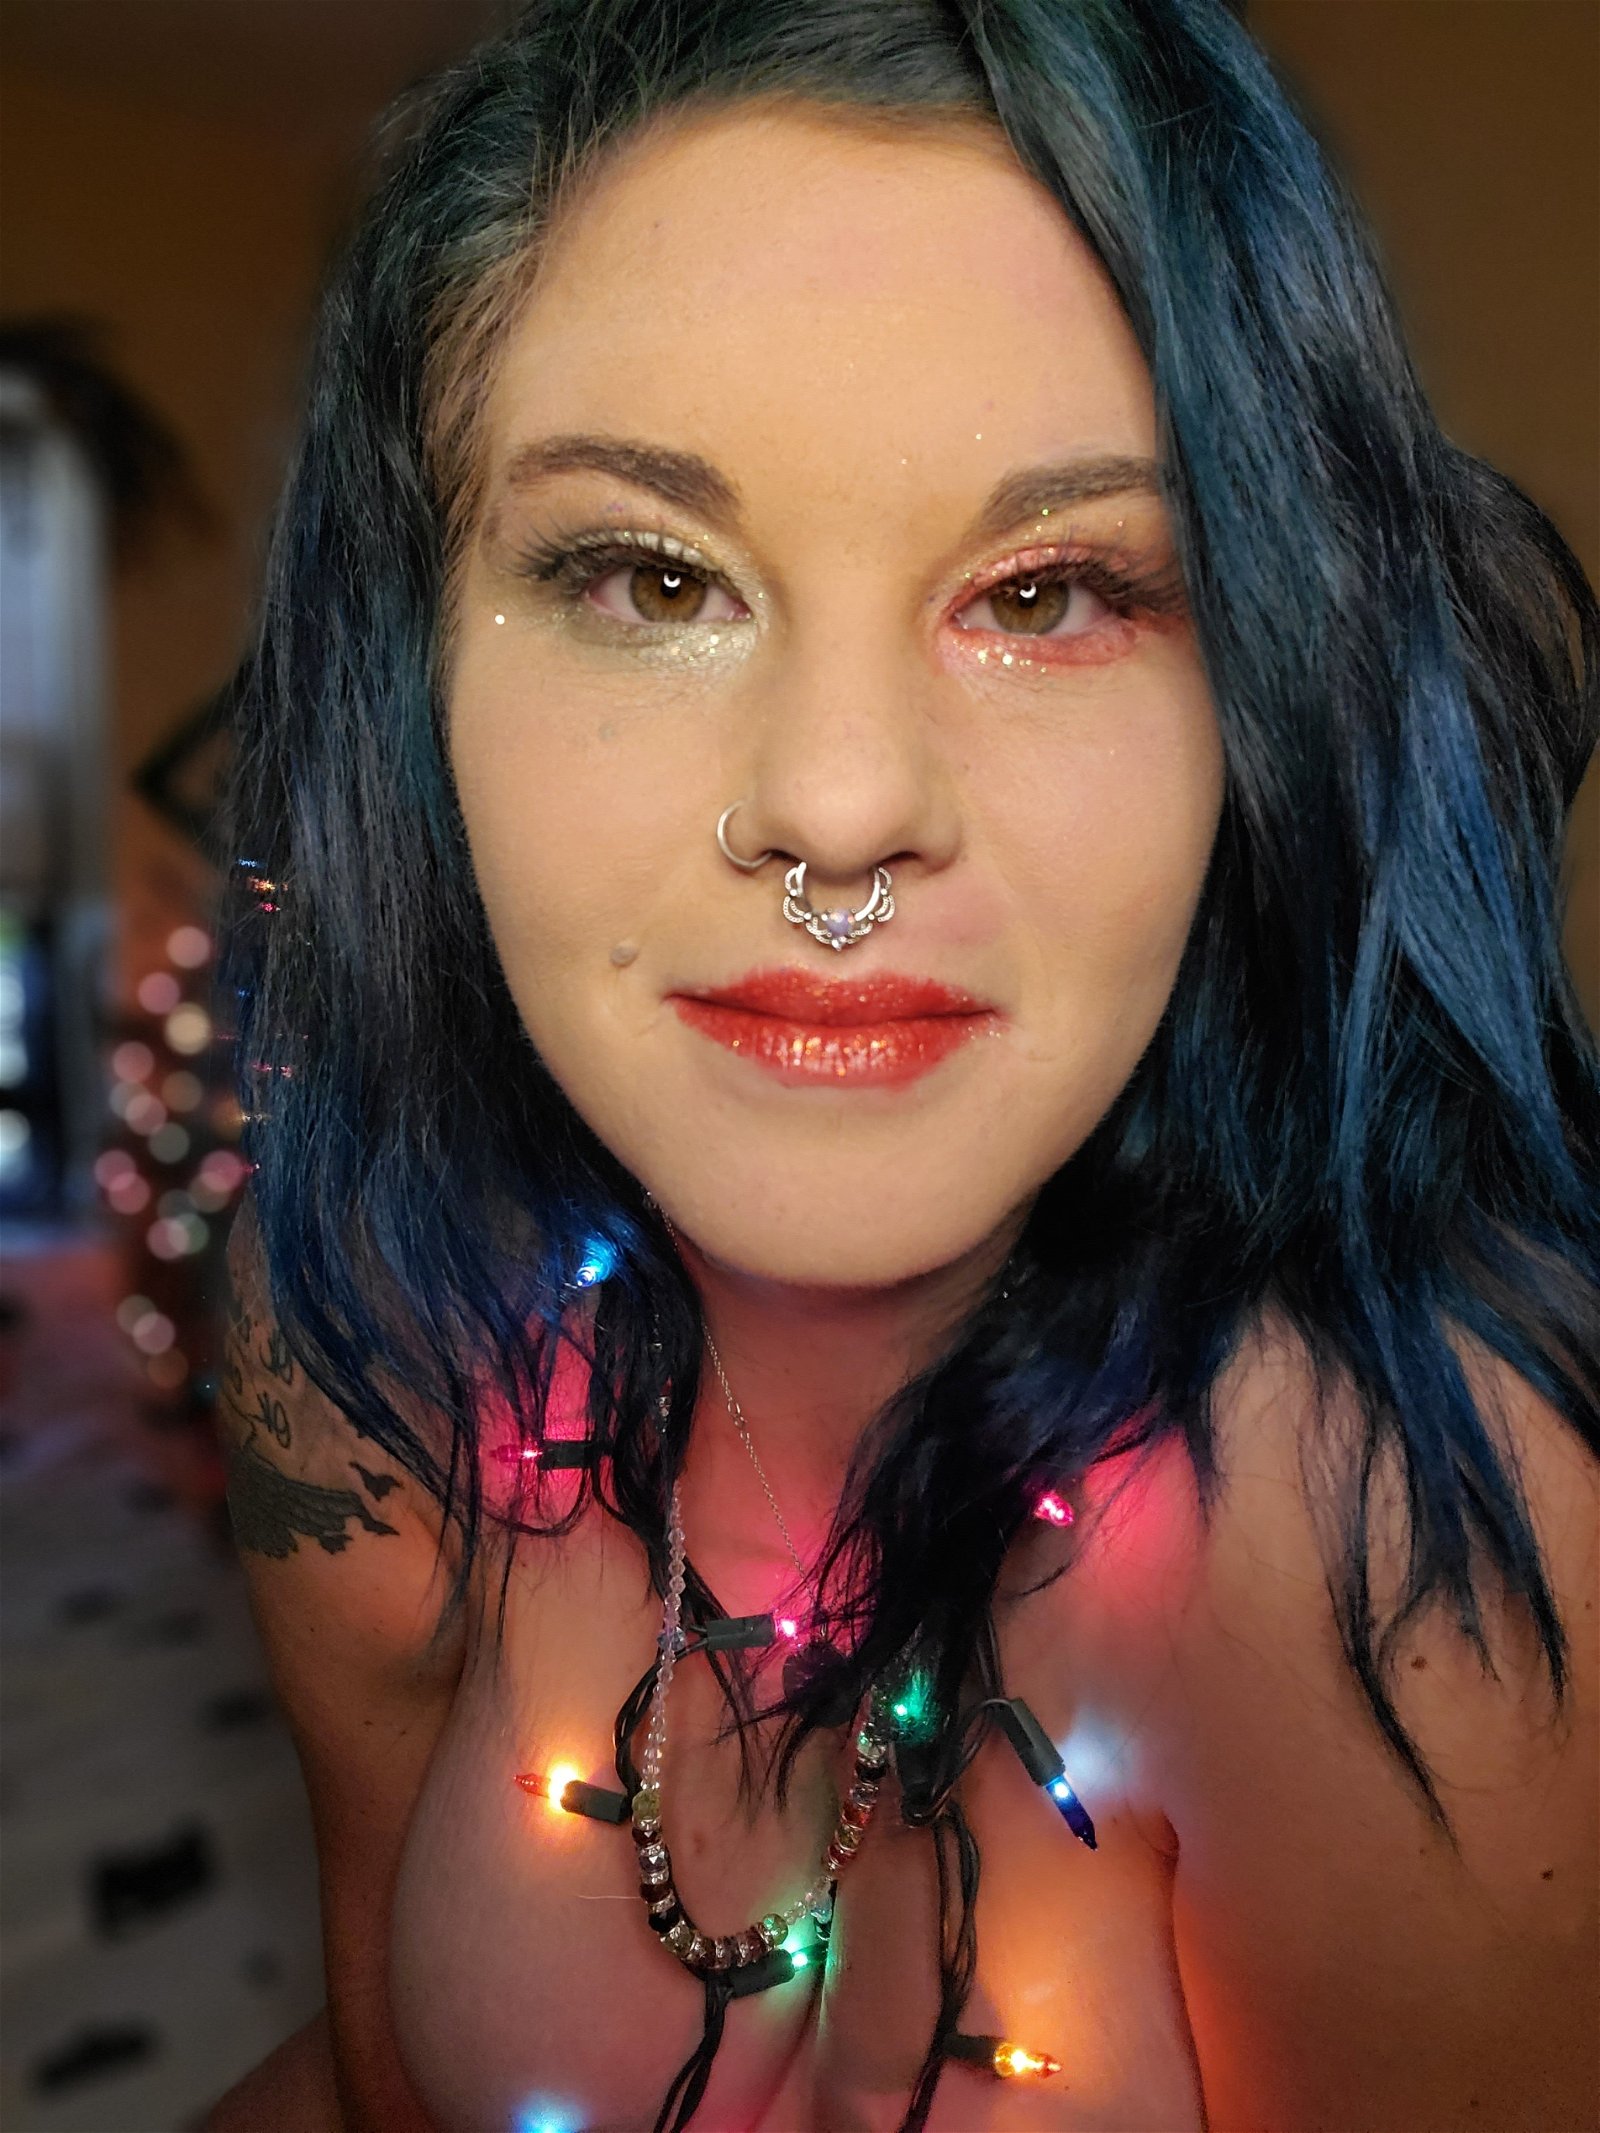 Photo by kaneImaGirl09 with the username @kaneImaGirl09, who is a verified user,  December 24, 2020 at 6:21 PM. The post is about the topic MILF and the text says '#Christmas #rebel #surprise#redneck if you cash up venmo or PayPal $15 I'll send you something super hot and a Christmas gift to your inbox!!! 😈😈🤤🤤😘😘🥰🥰🎁❄️🧑‍🎄🌲☃️'